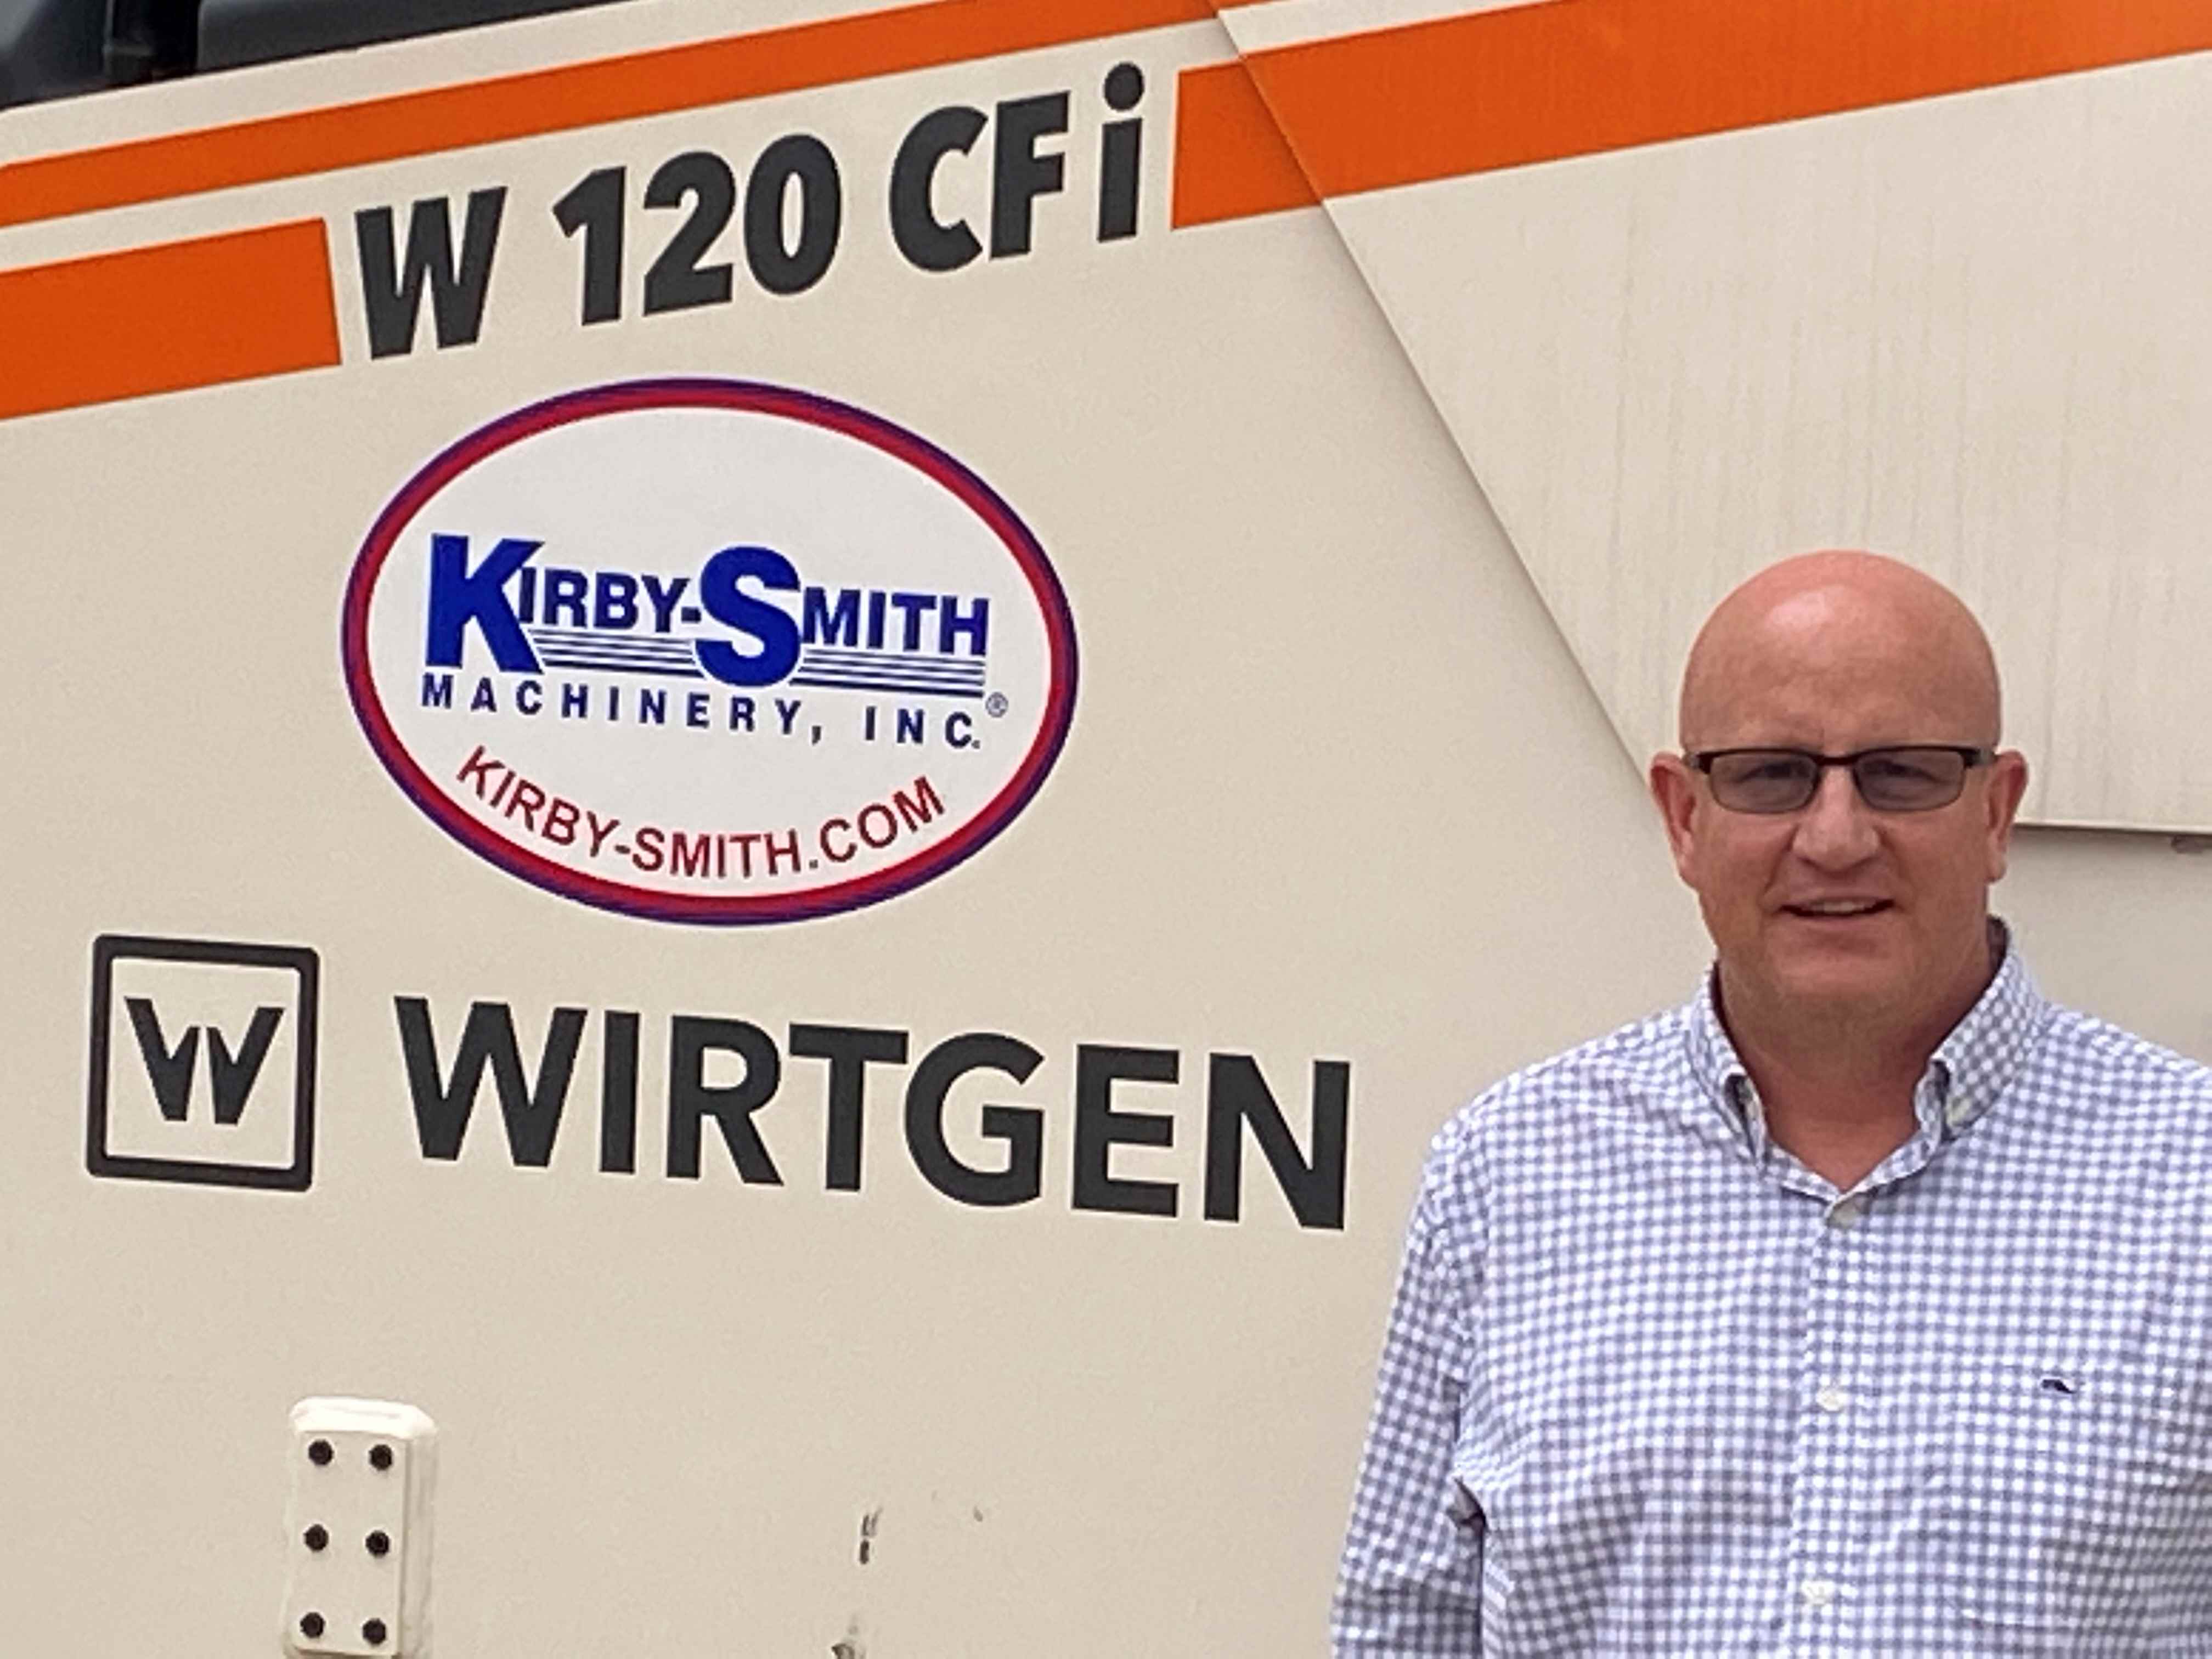 Vern Gunderson, equipment industry veteran hired as VP for Kirby-Smith Machinery